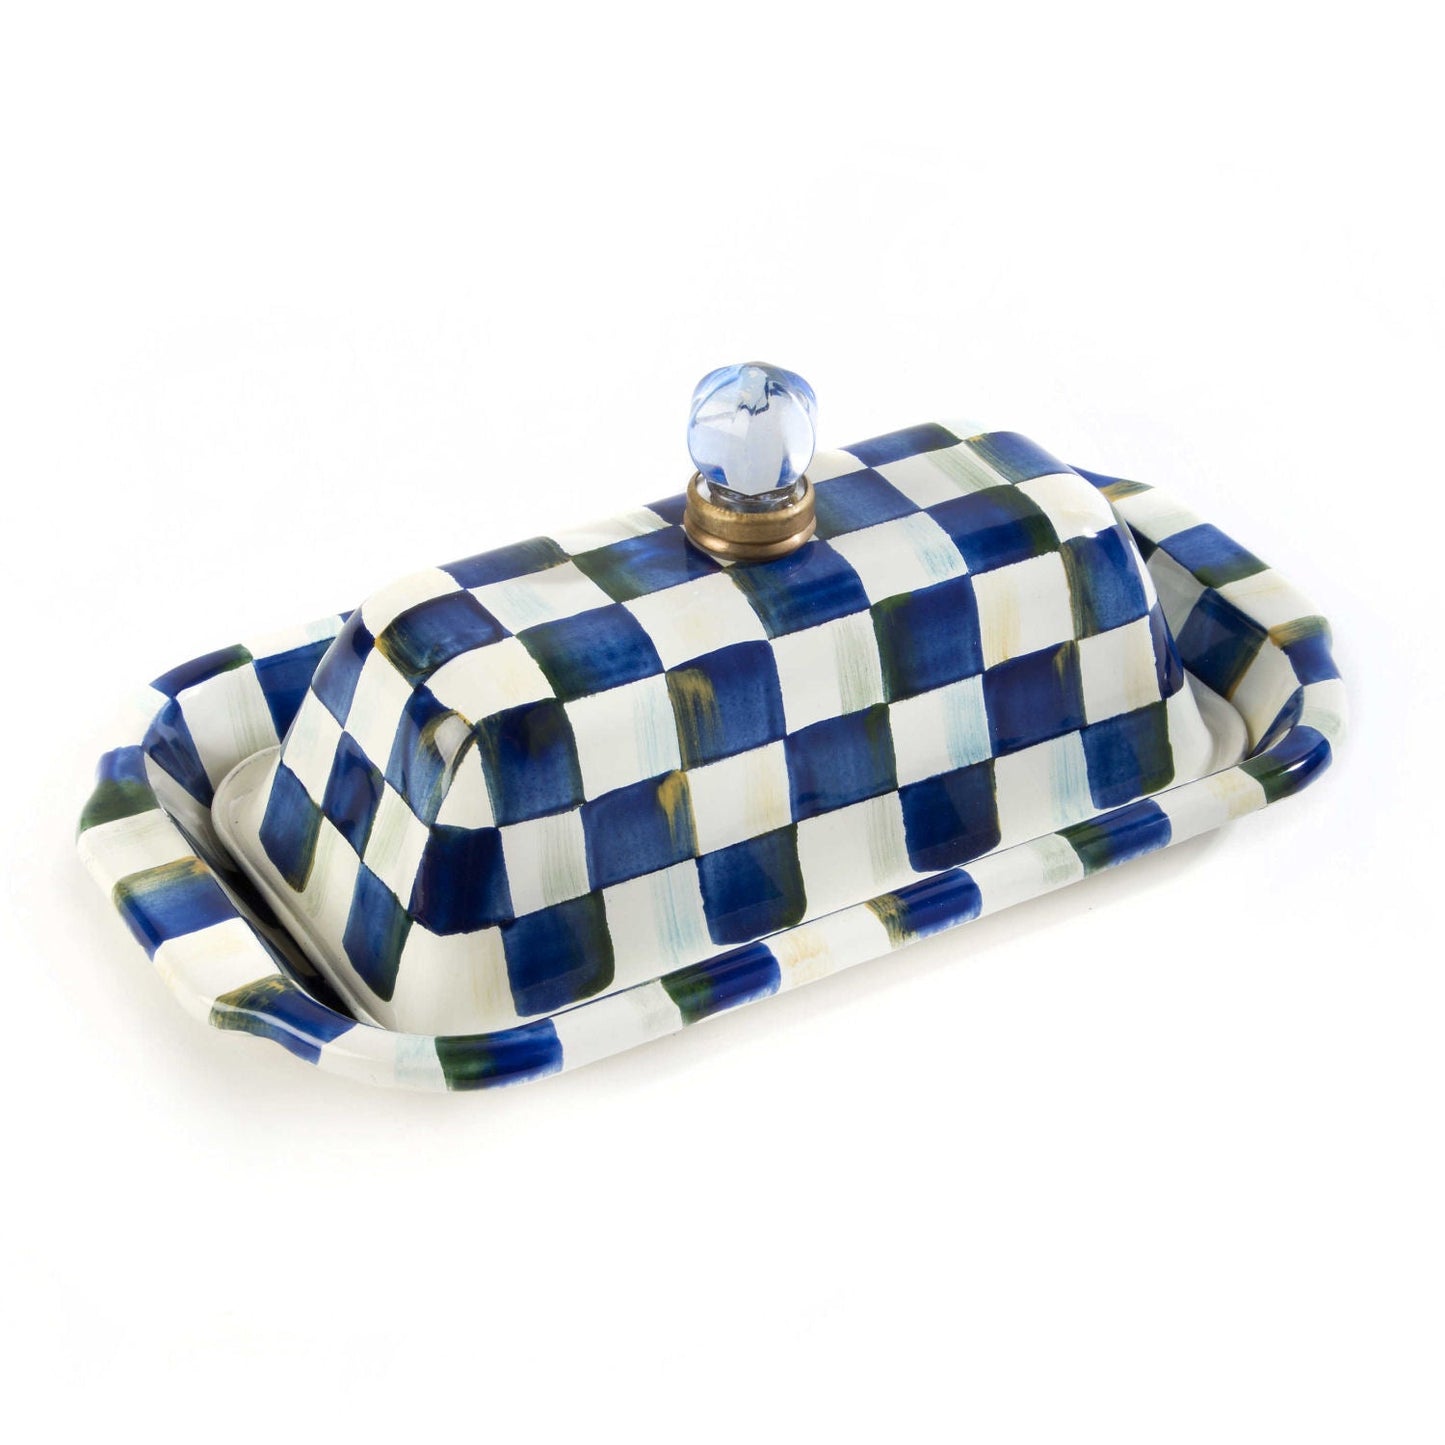 Royal Check Blue Enamel Butter Box by Mackenzie-Childs - |VESIMI Design| Luxury and Rustic bathrooms online